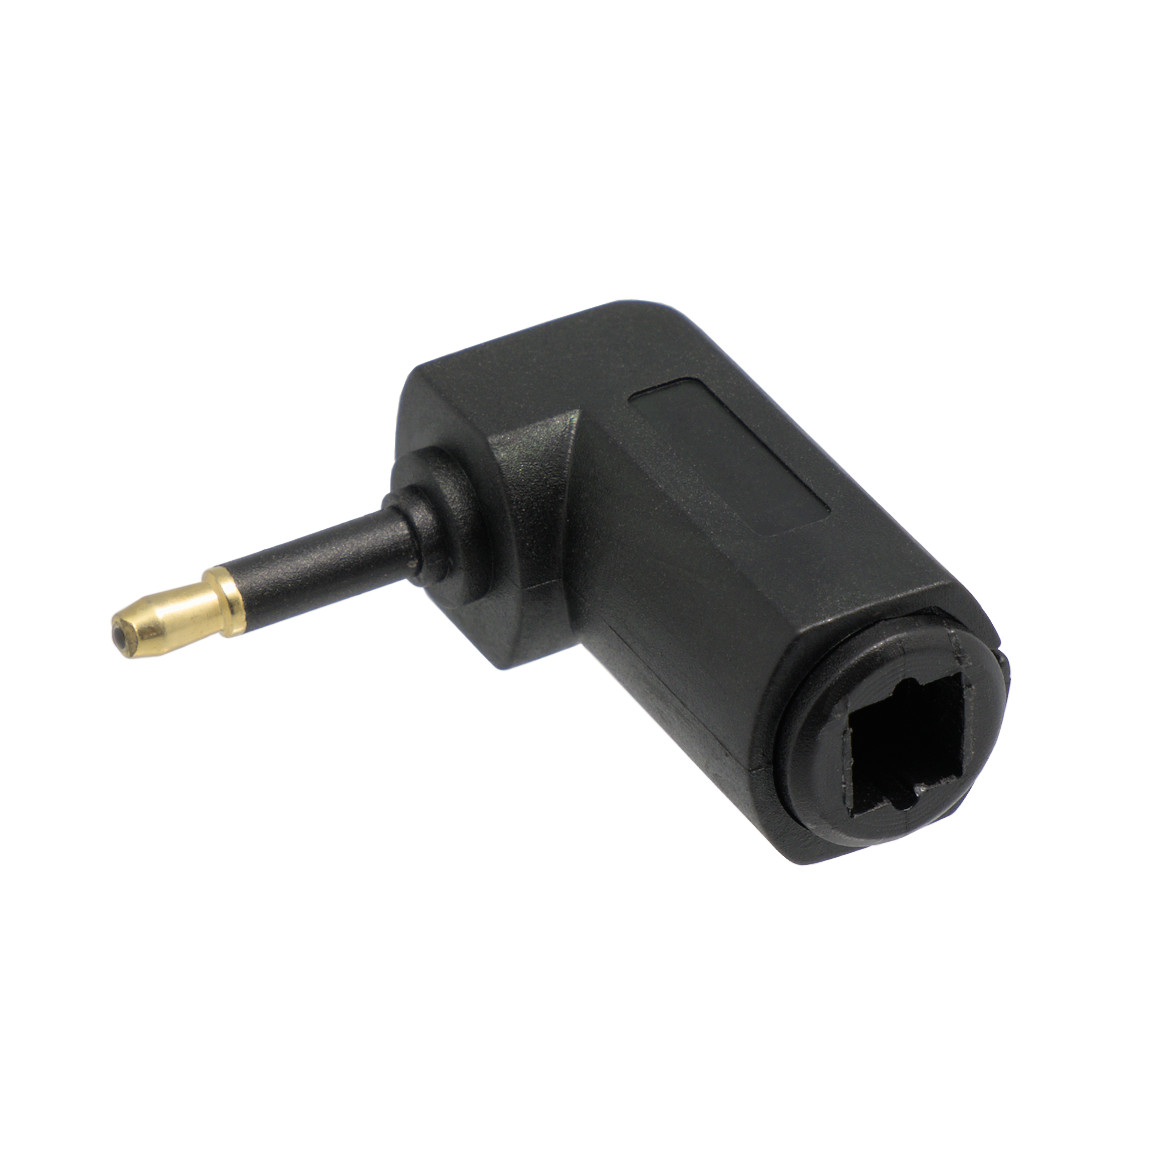 Adapter Toslink female to Mini Toslink 3.5mm angled